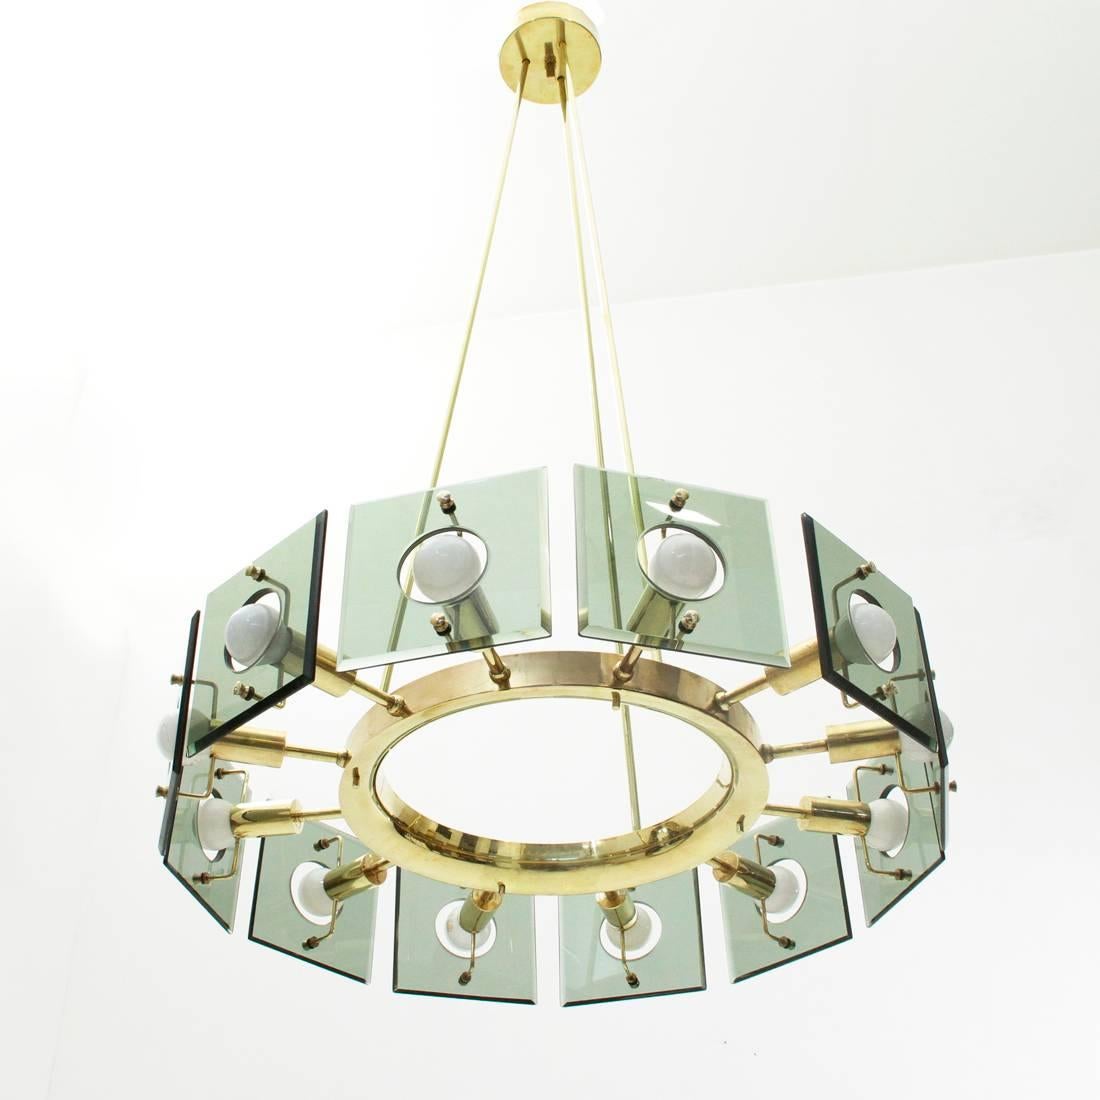 Chandelier produced by Gino Paroldo in the 50s.
Rosette, stems and structure, in brass.
Diffusers in smoked glass.
Excellent general conditions, some signs due to normal use over time.

Dimensions: Diameter 61 cm, height 110 cm.